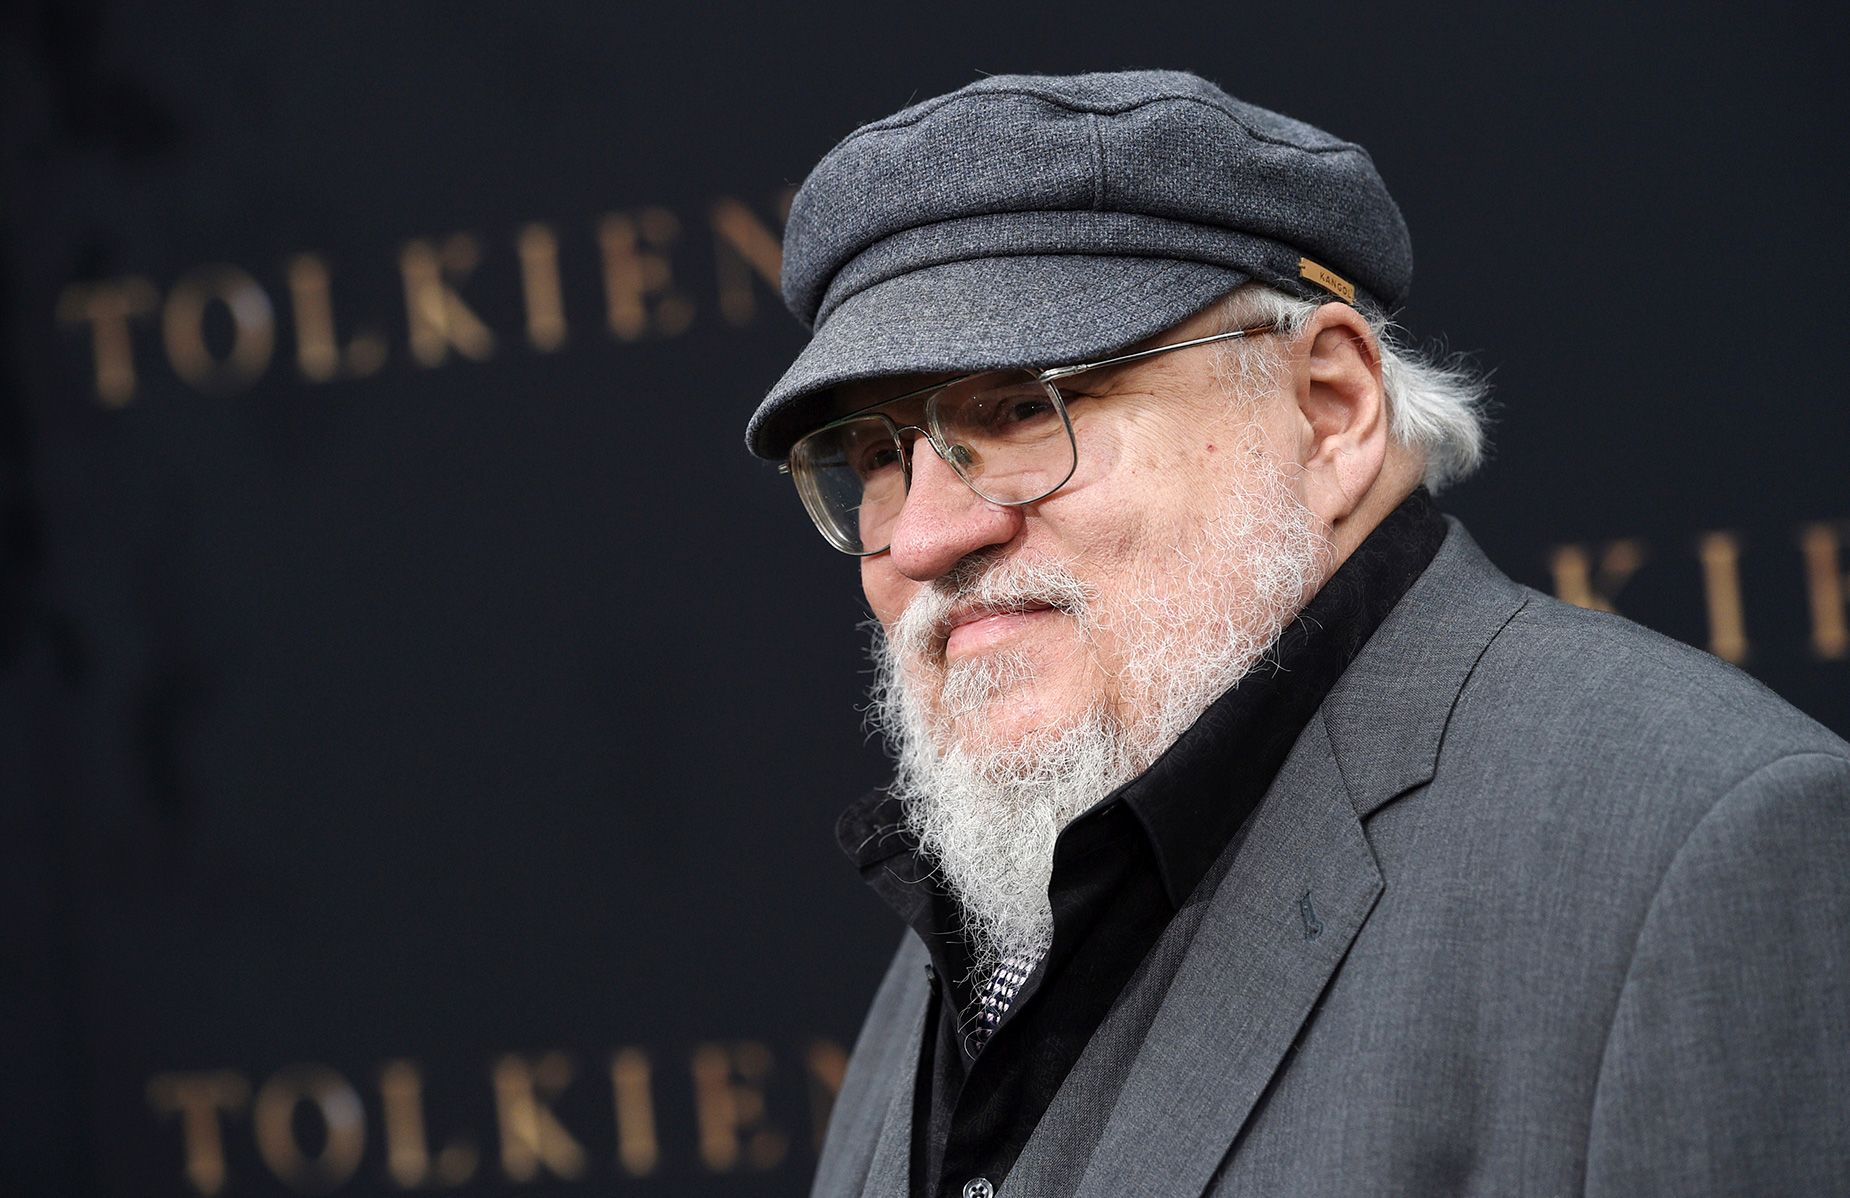 Author George R.R. Martin has joined a class action lawsuit against OpenAI for using his work without permission to train its systems.